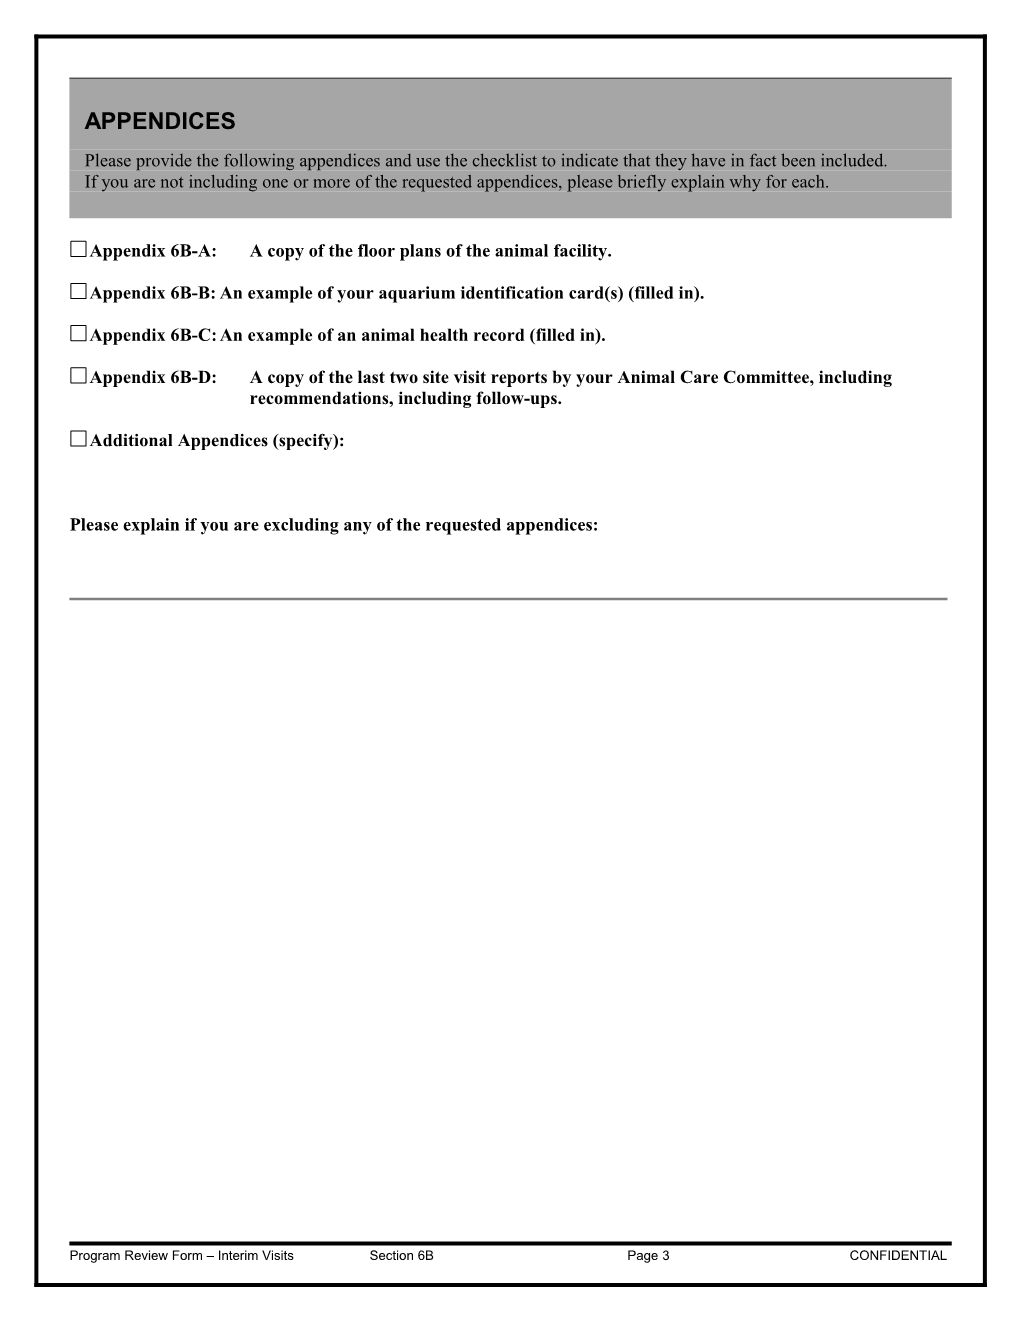 ANIMAL CARE and USE PROGRAM REVIEW FORM (For Interim Visits)